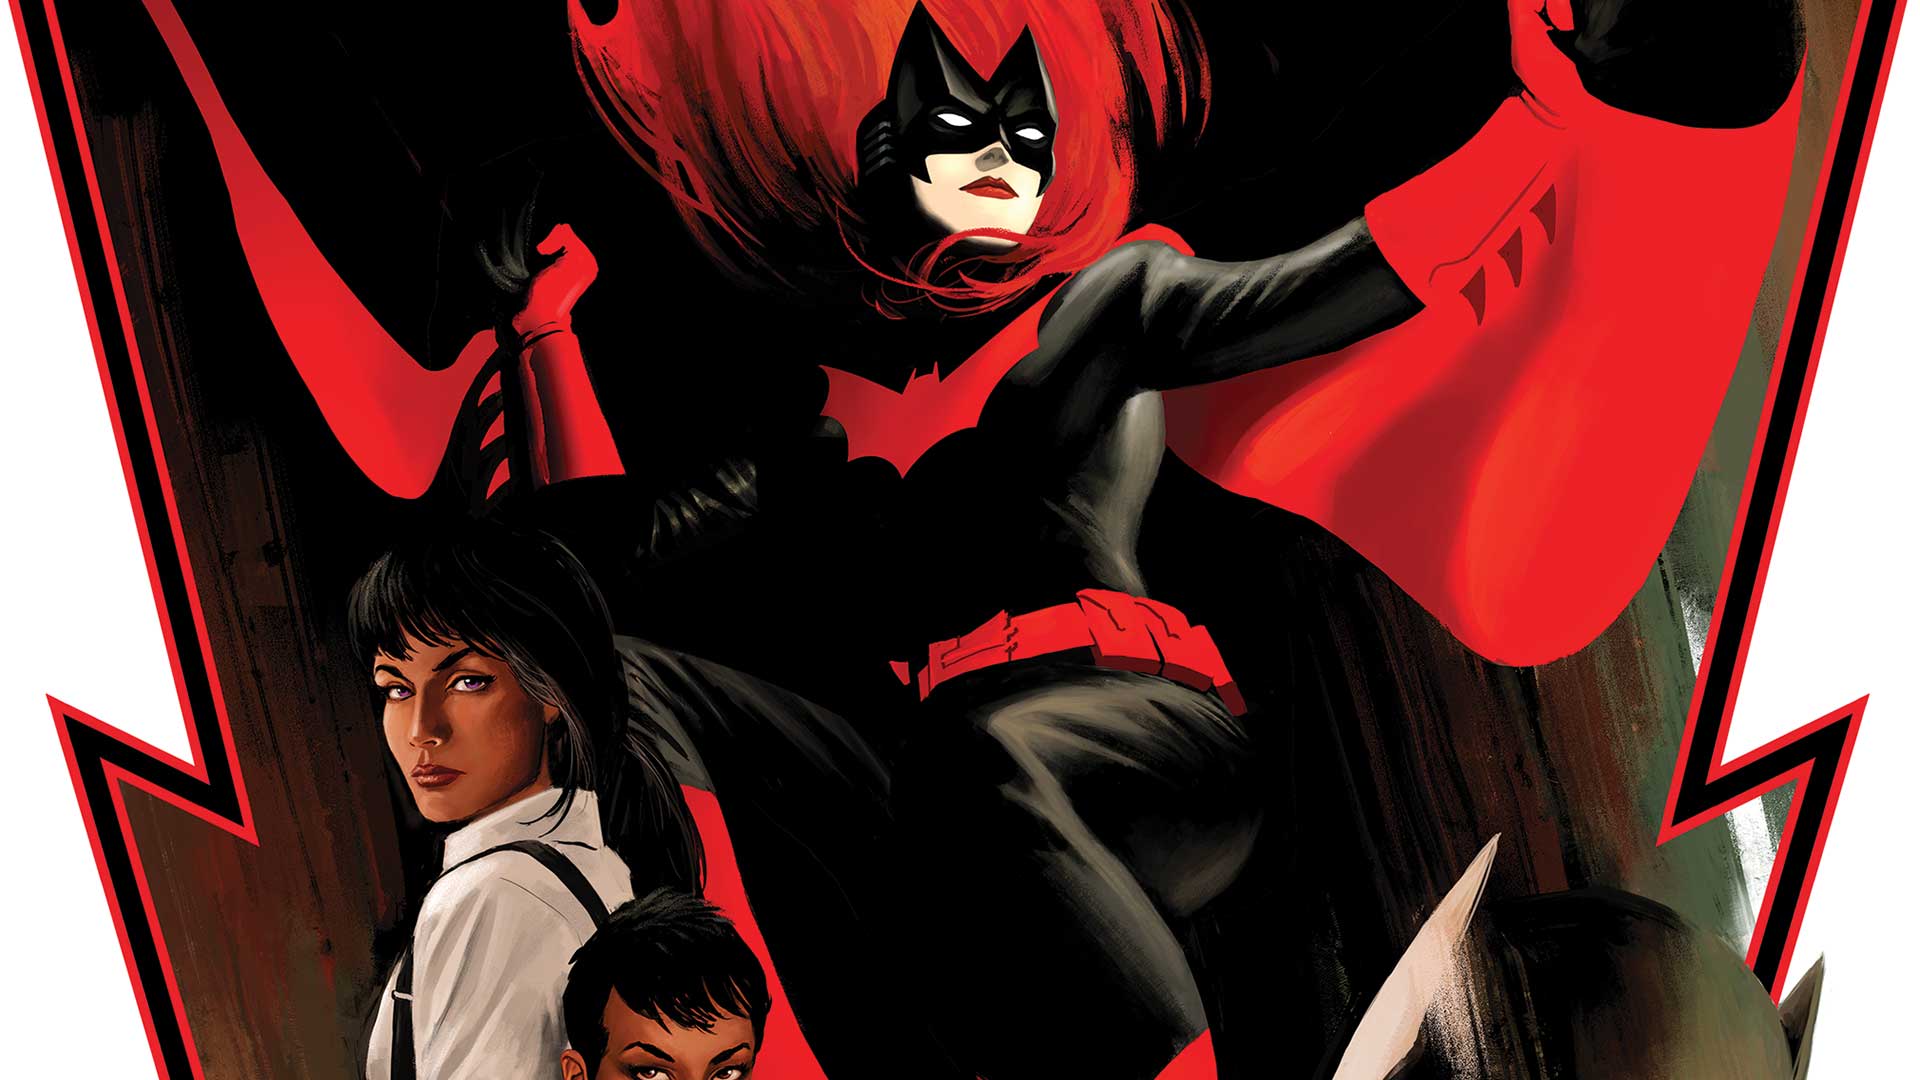 Batwoman will appear in the Arrow-verse during The CW's crossover event